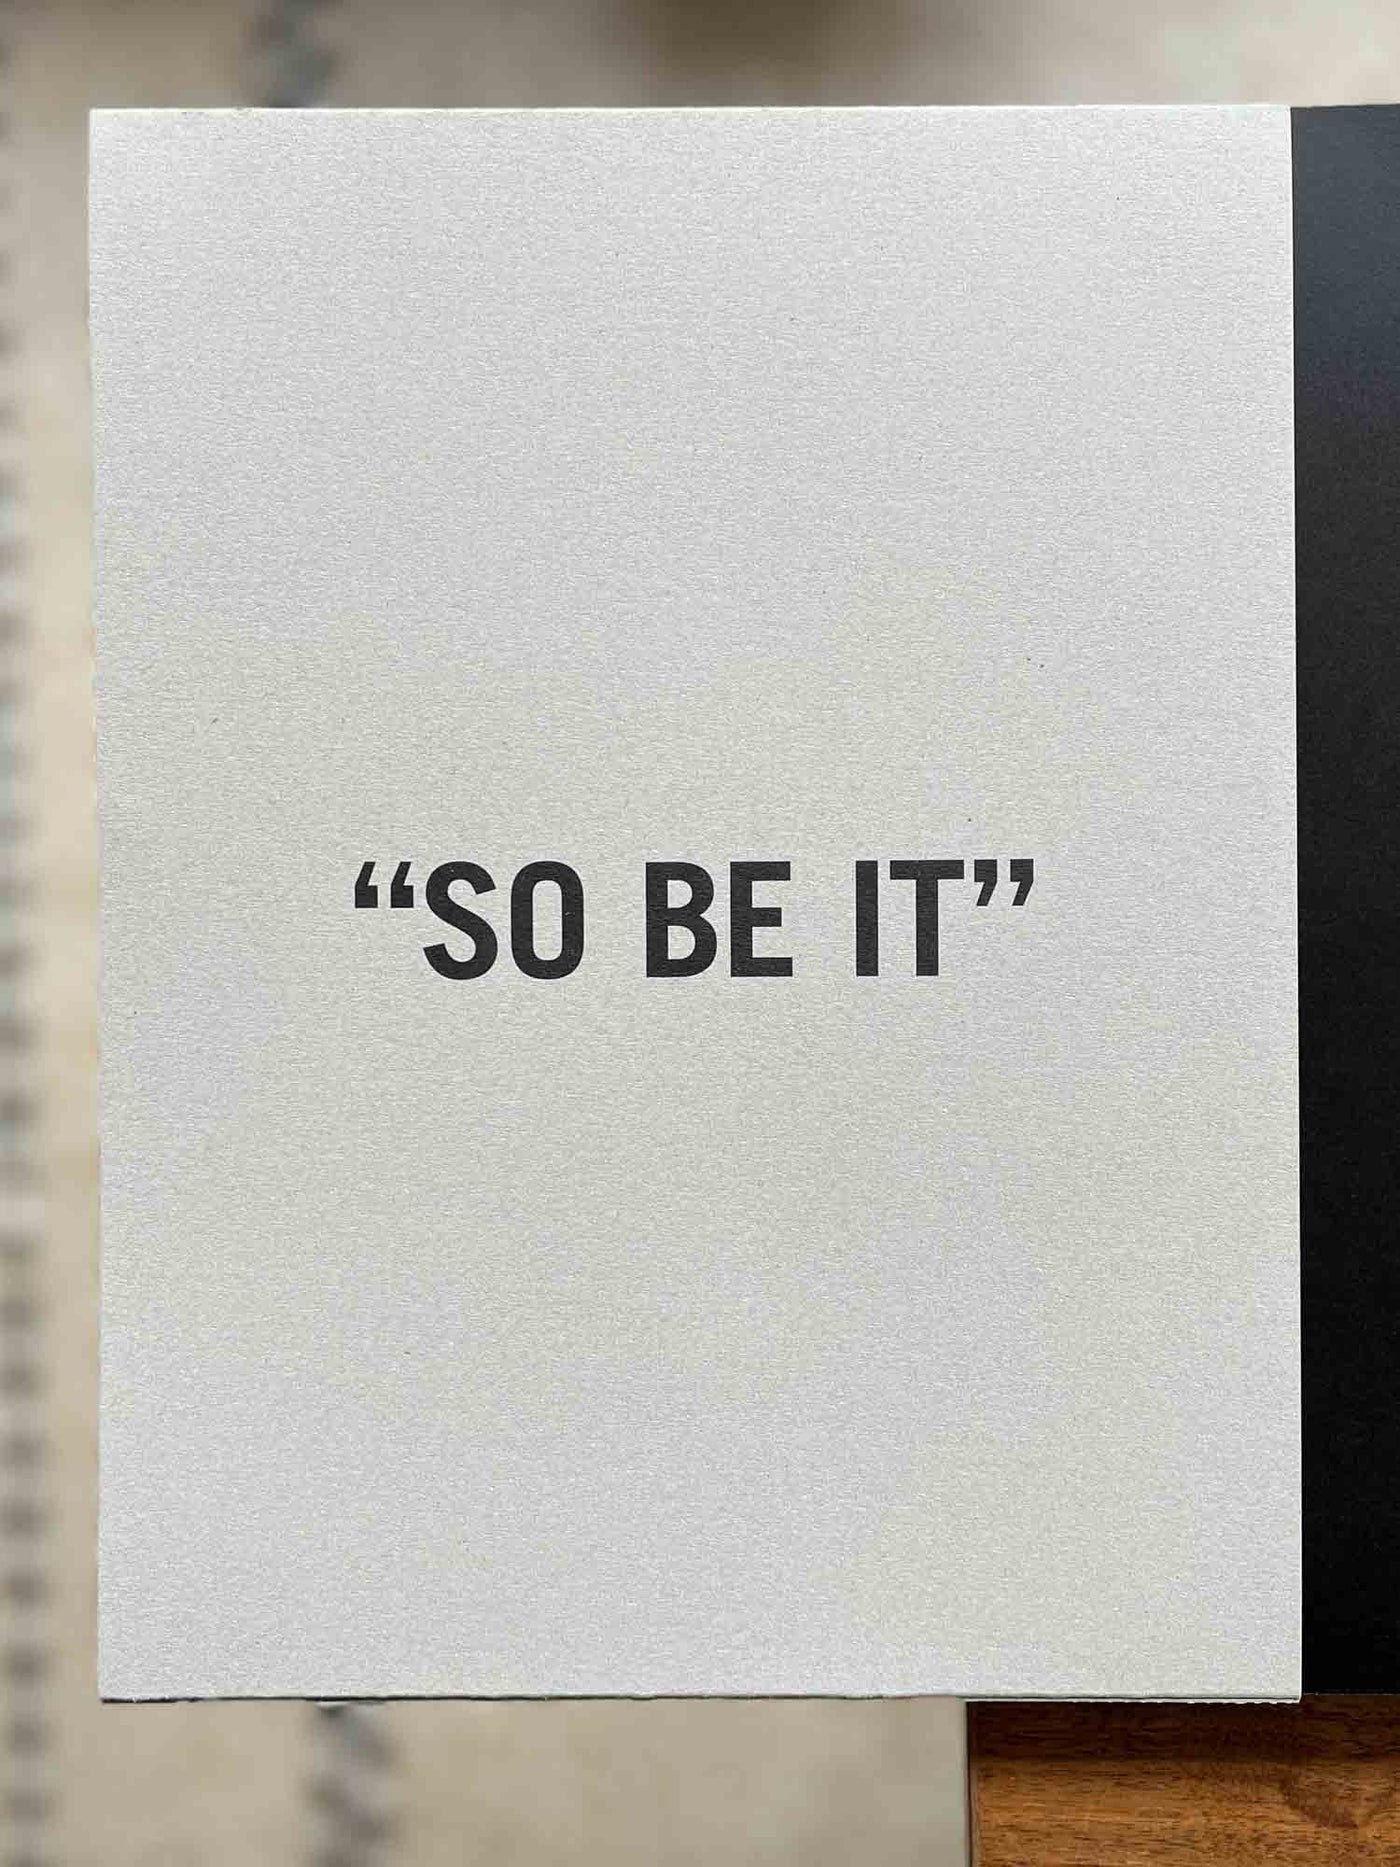 AINSI SOIT-IL - SO BE IT by Ari Marcopoulos - Tipi bookshop